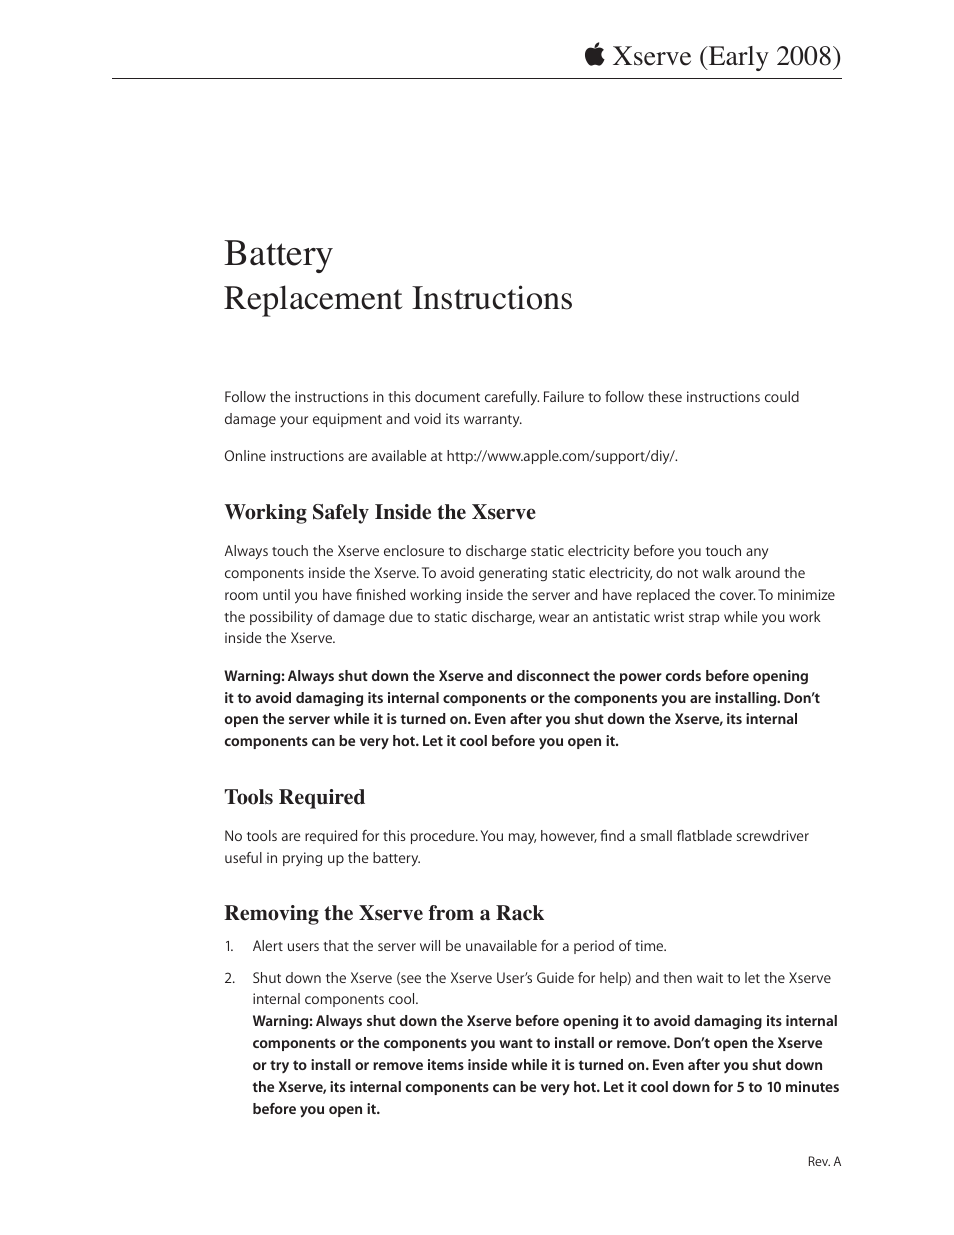 Xserve (Early 2008) DIY Procedure for Battery